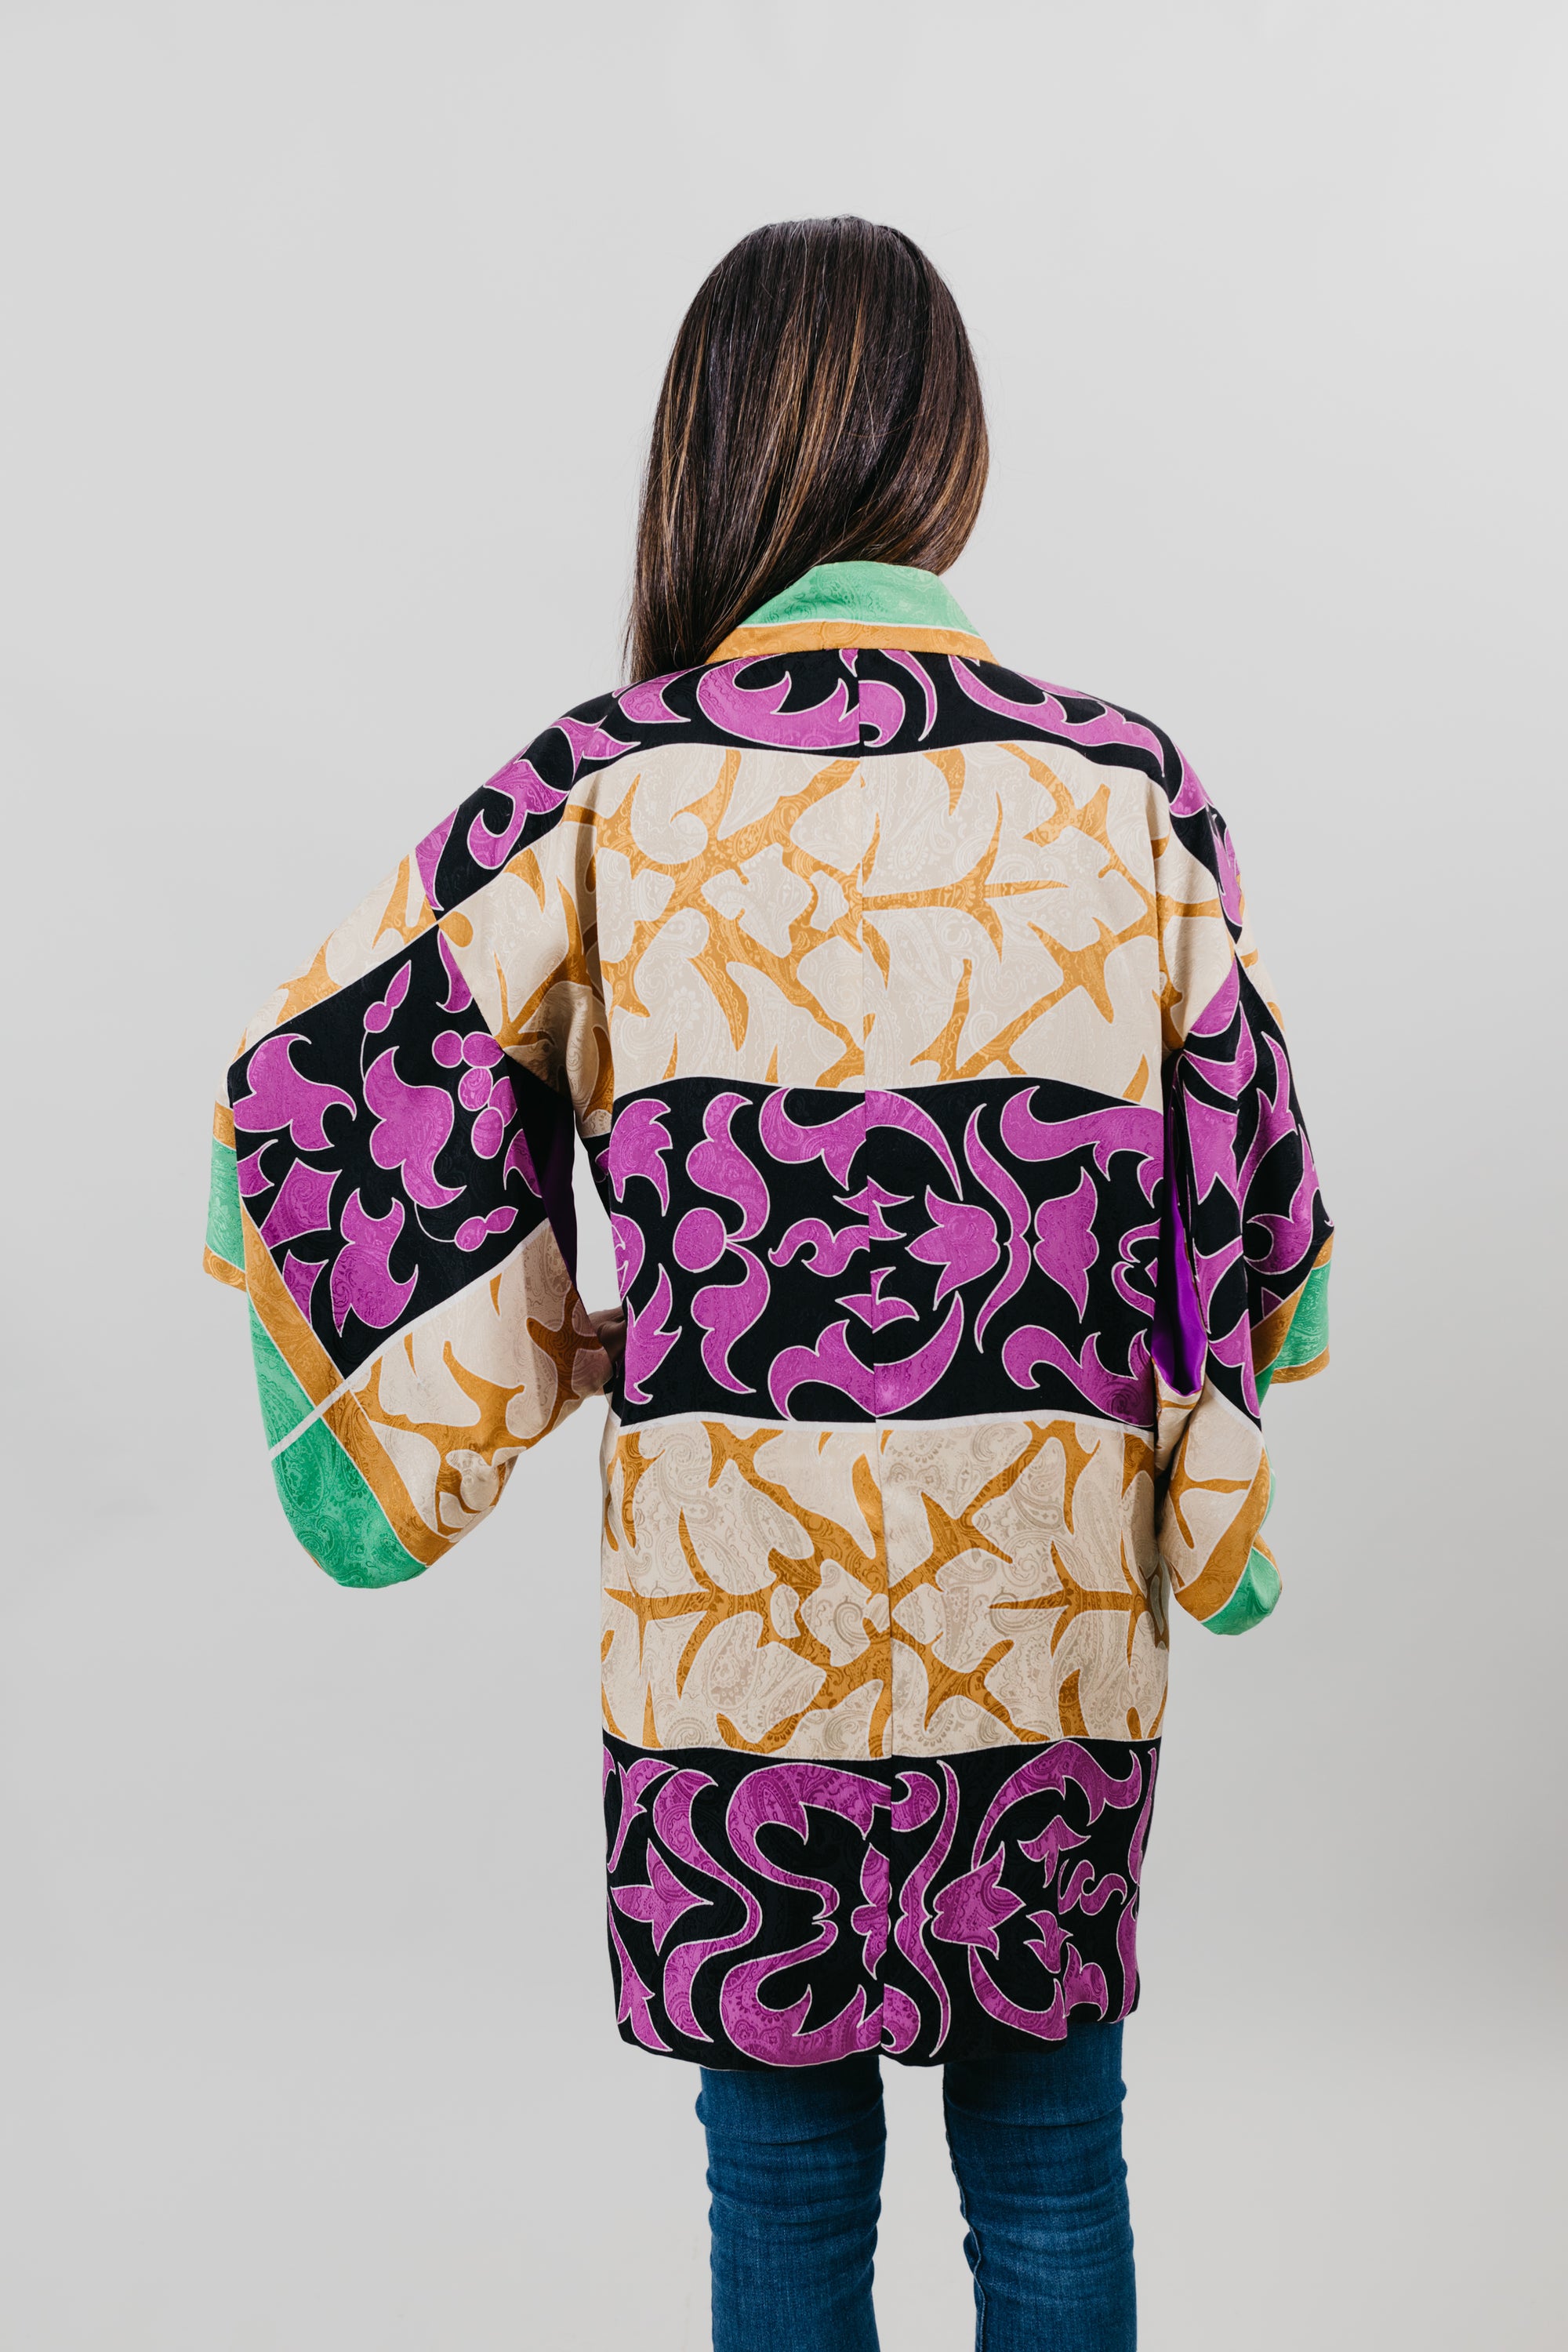 Asian woman wearing a purple, black, green, and gold printed Haori - back view with white background